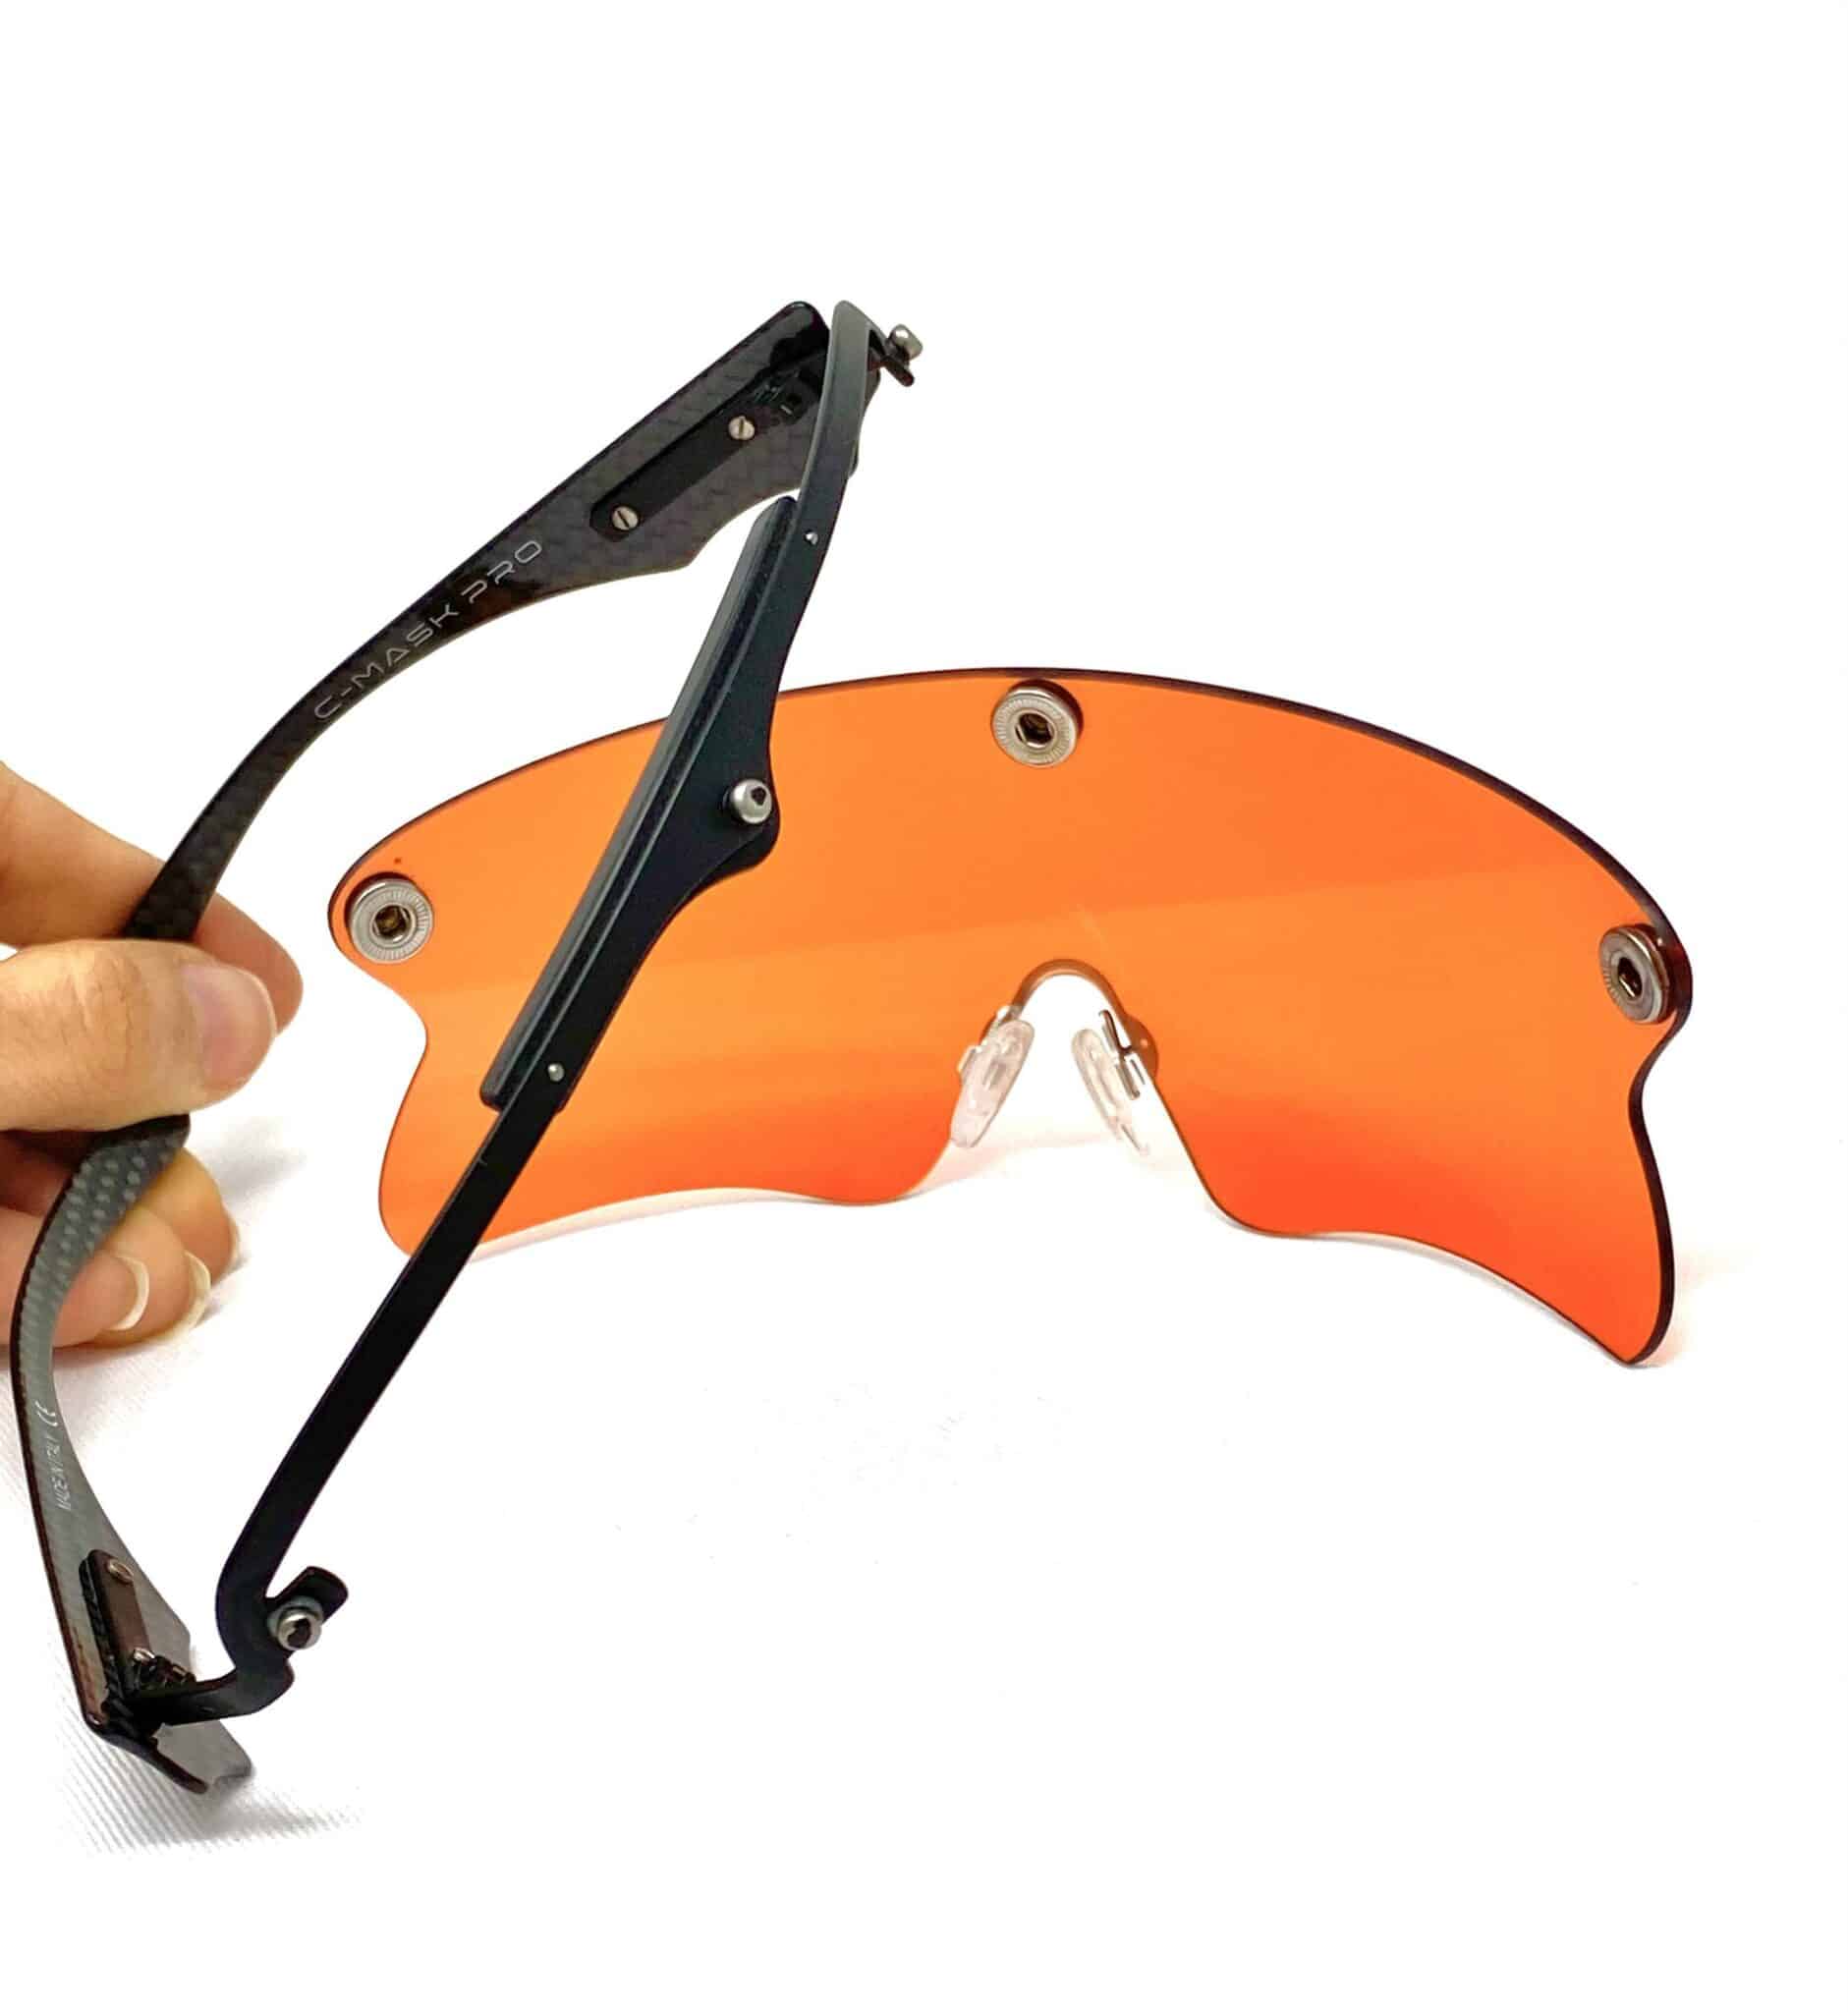 Castellani C-Mask Pro shooting glasses with Lens fast changing system.